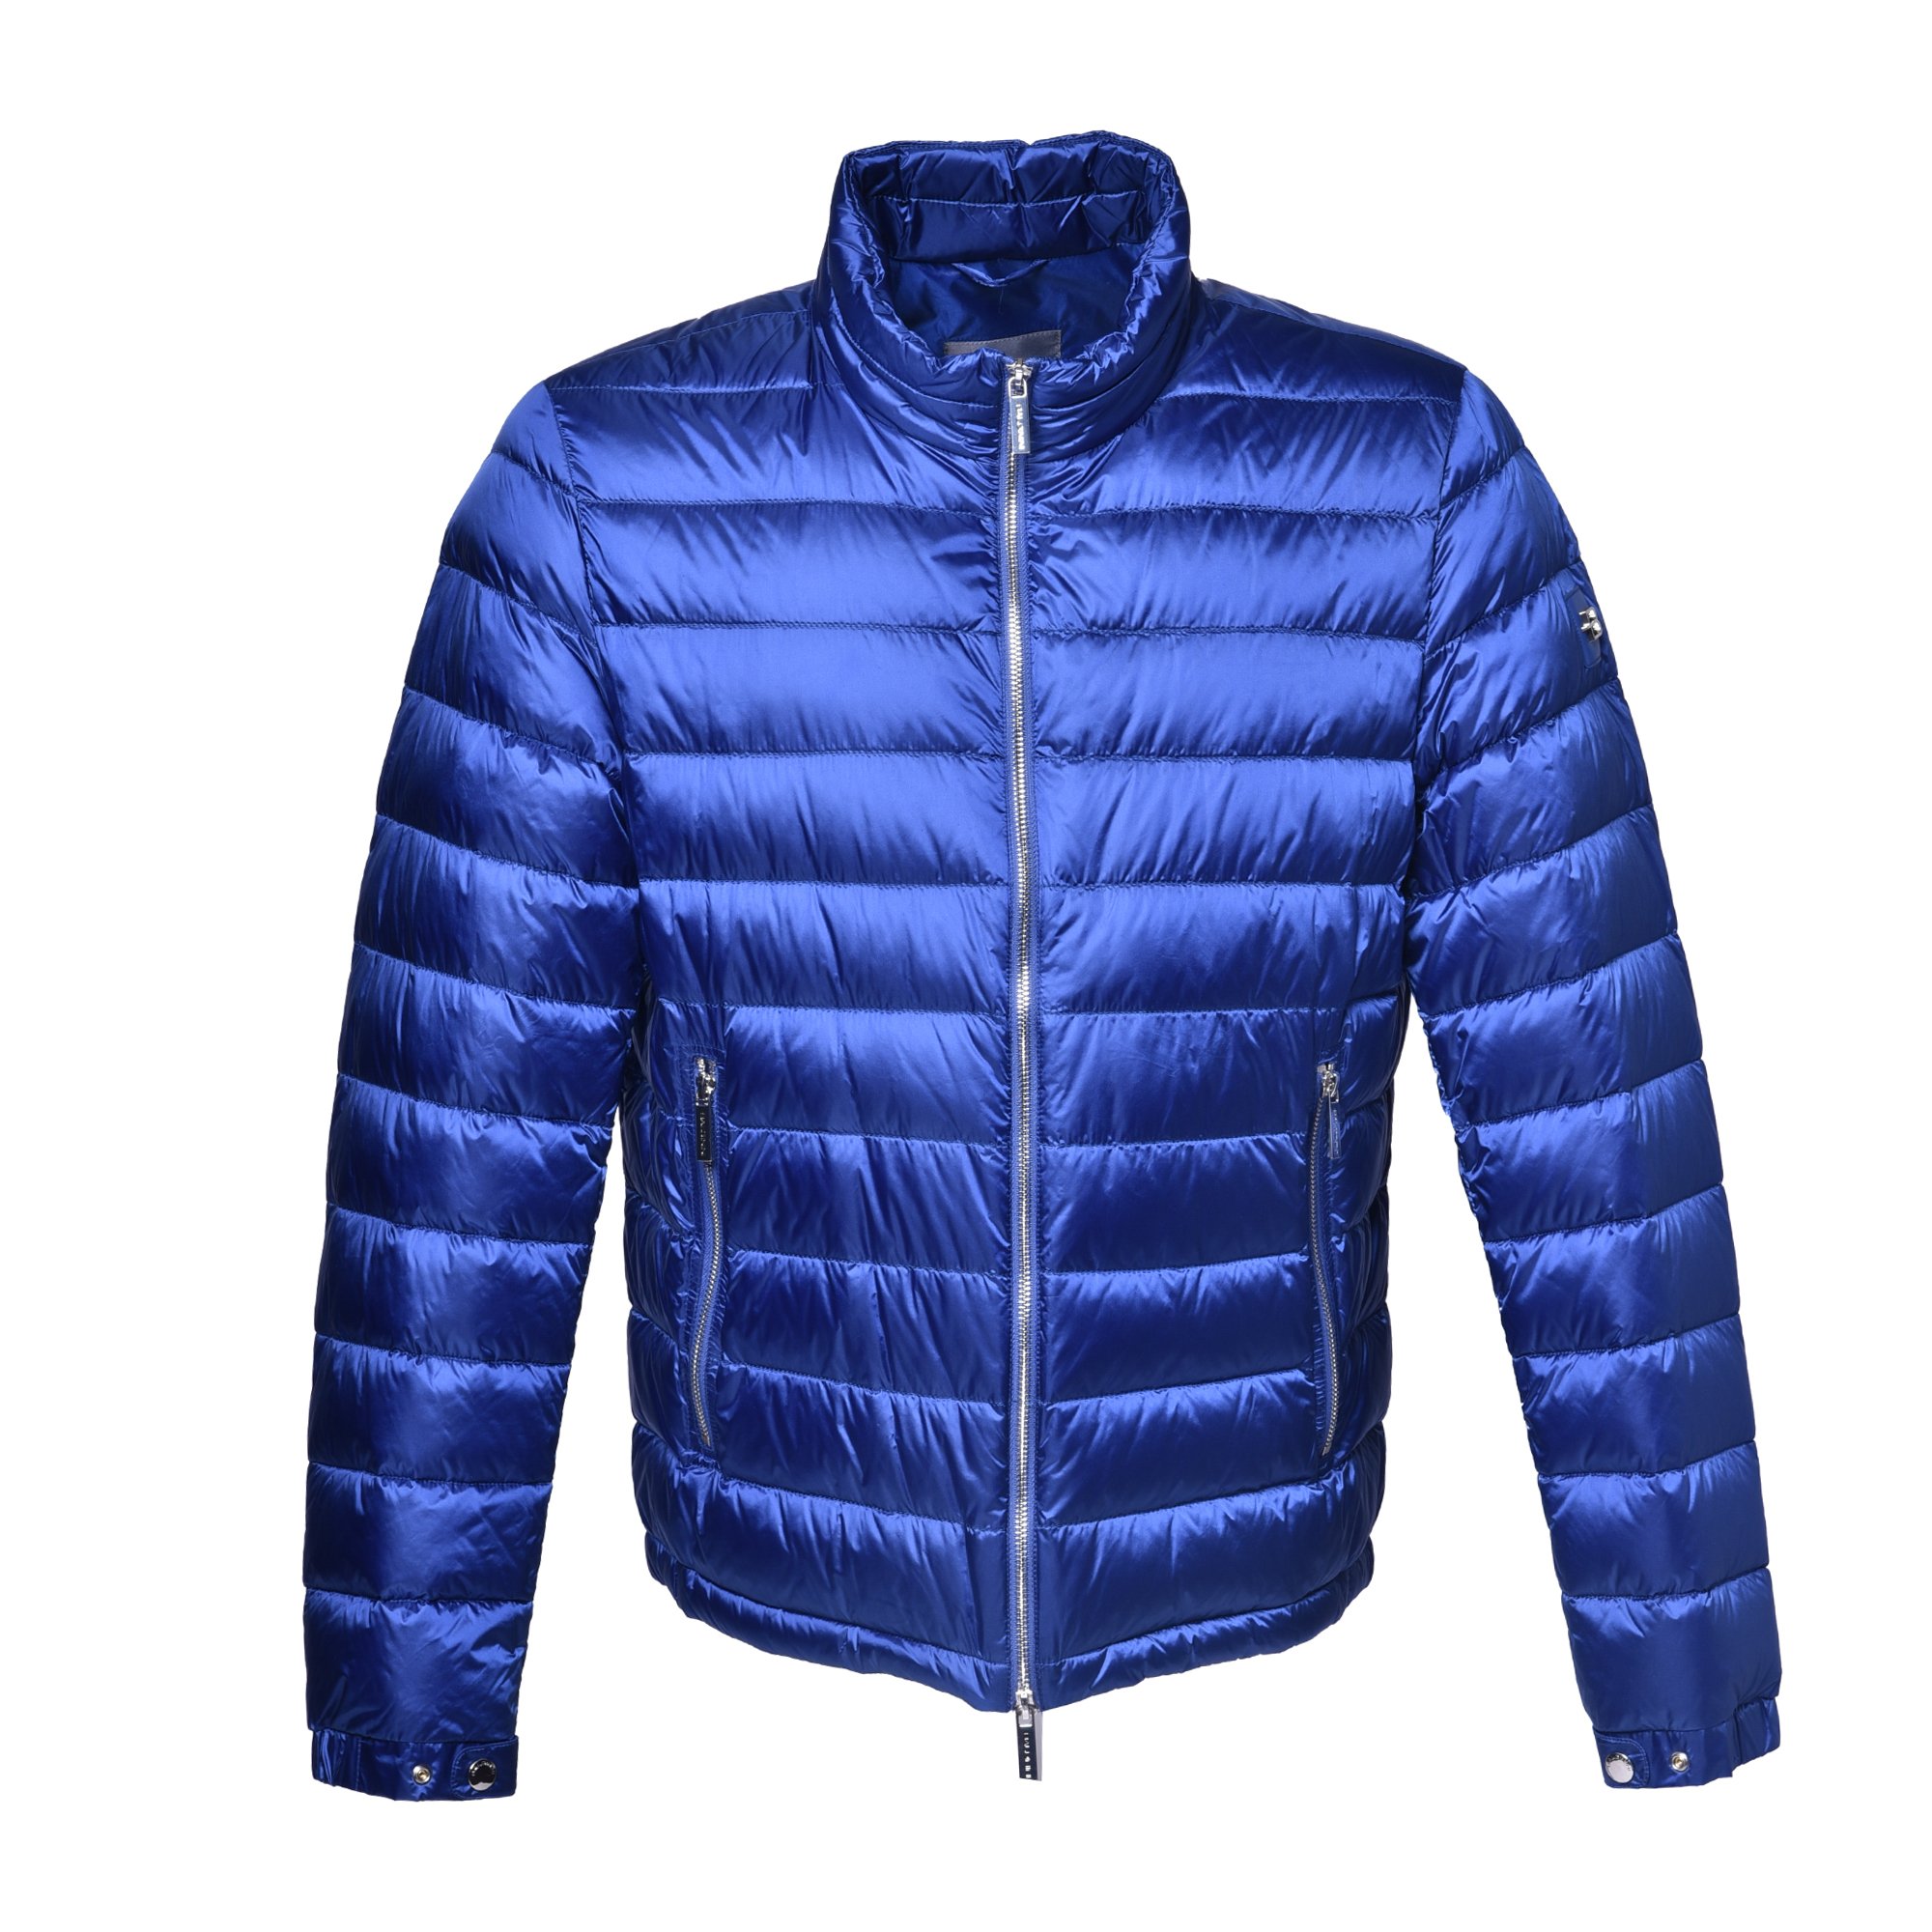 Down jacket in electric blue nylon image